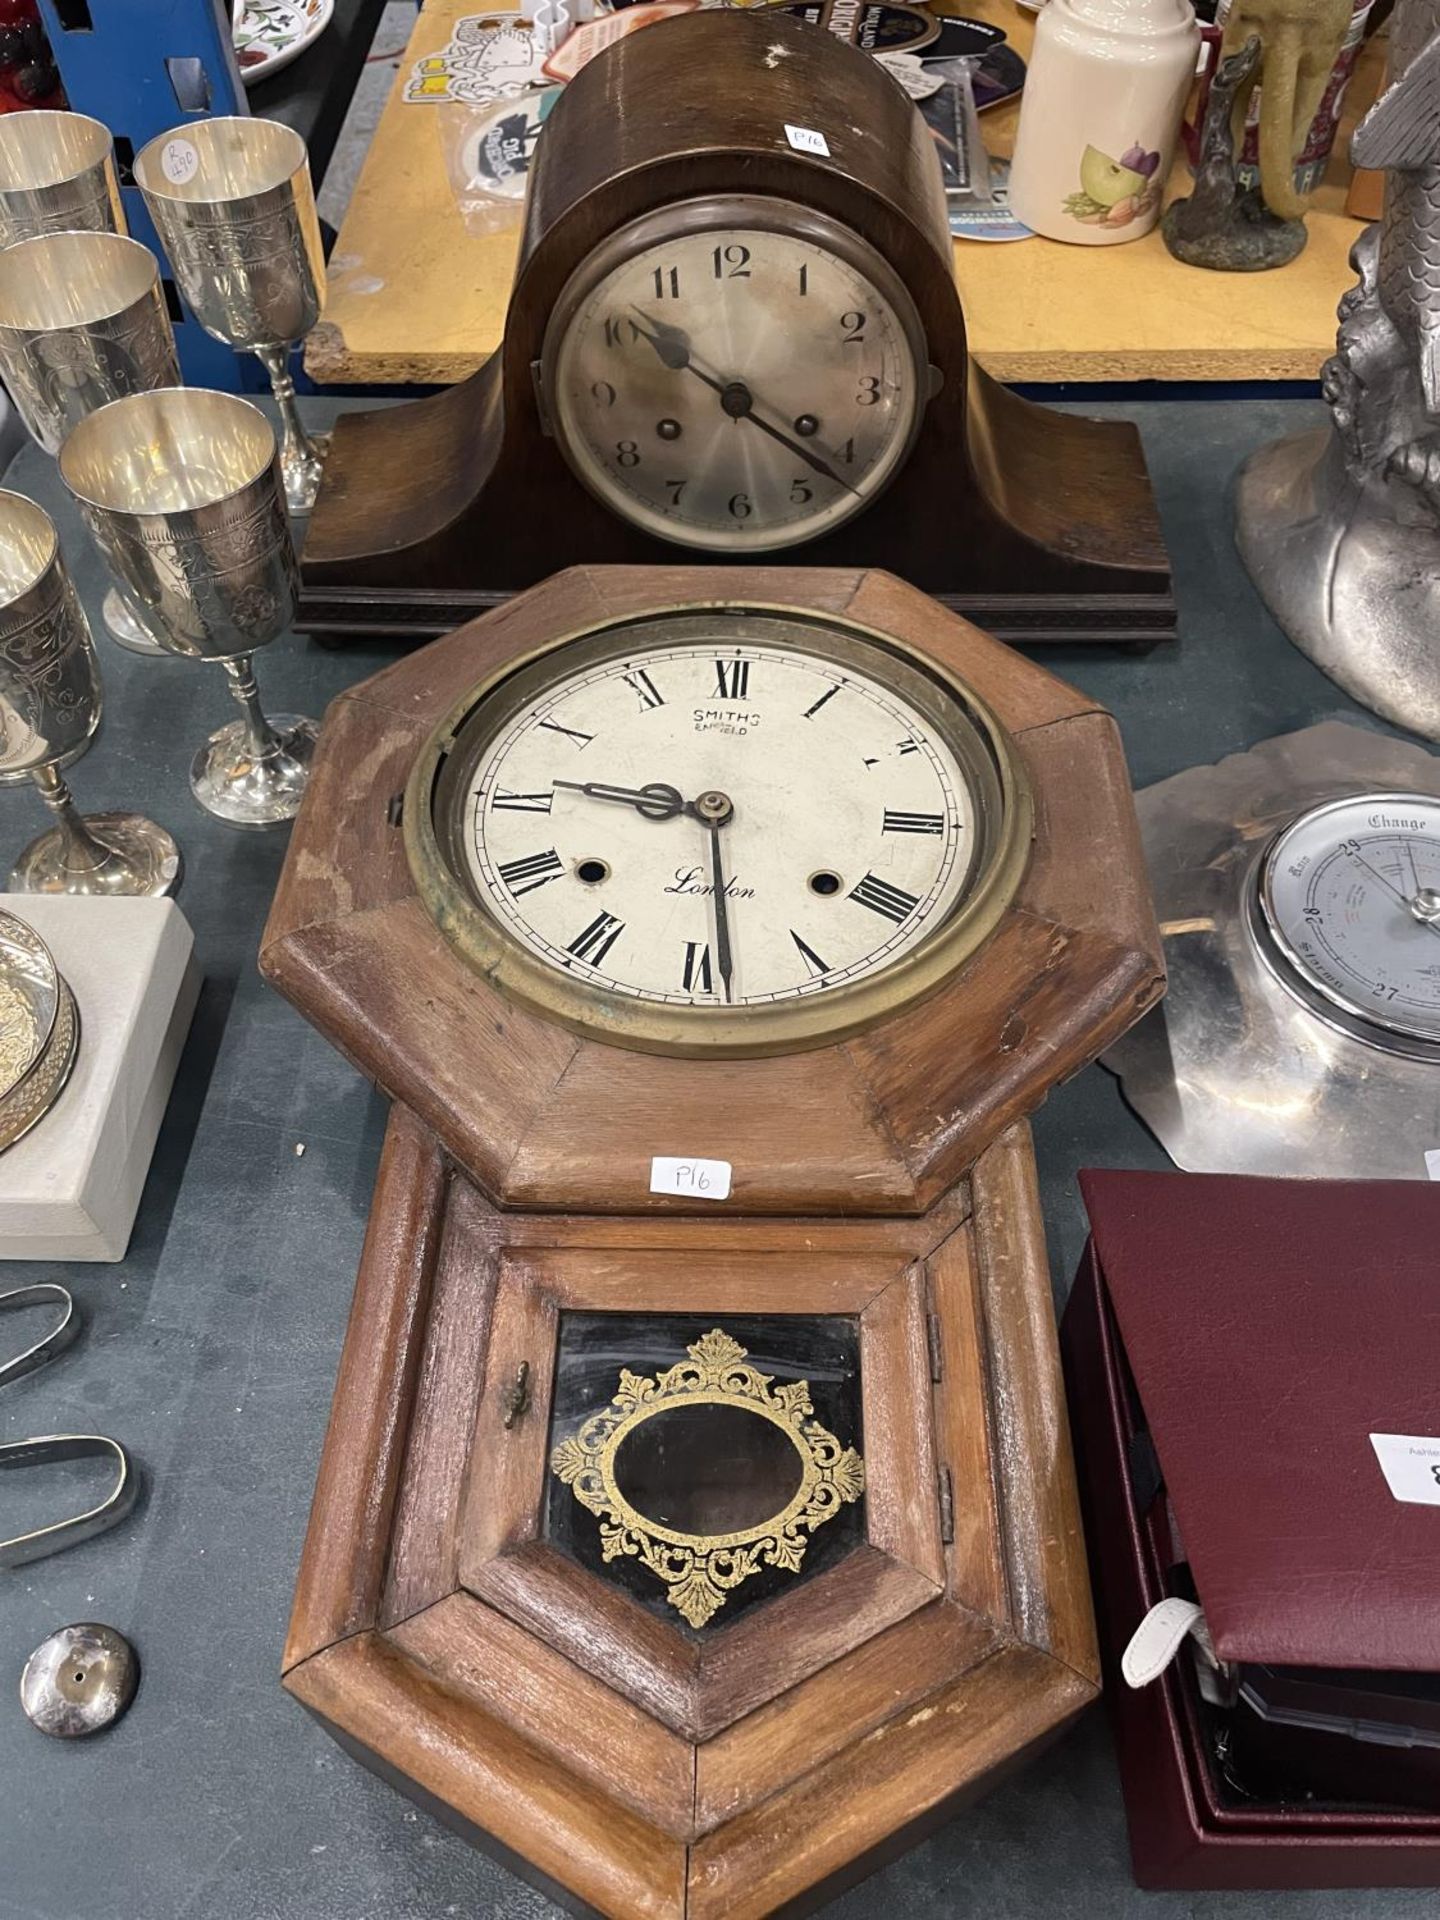 A VINTAGE SMITH'S ENFIELD MAHOGANY CASED WALL CLOCK IN NEED OF RESTORATION PLUS A NAPOLEON'S HAT